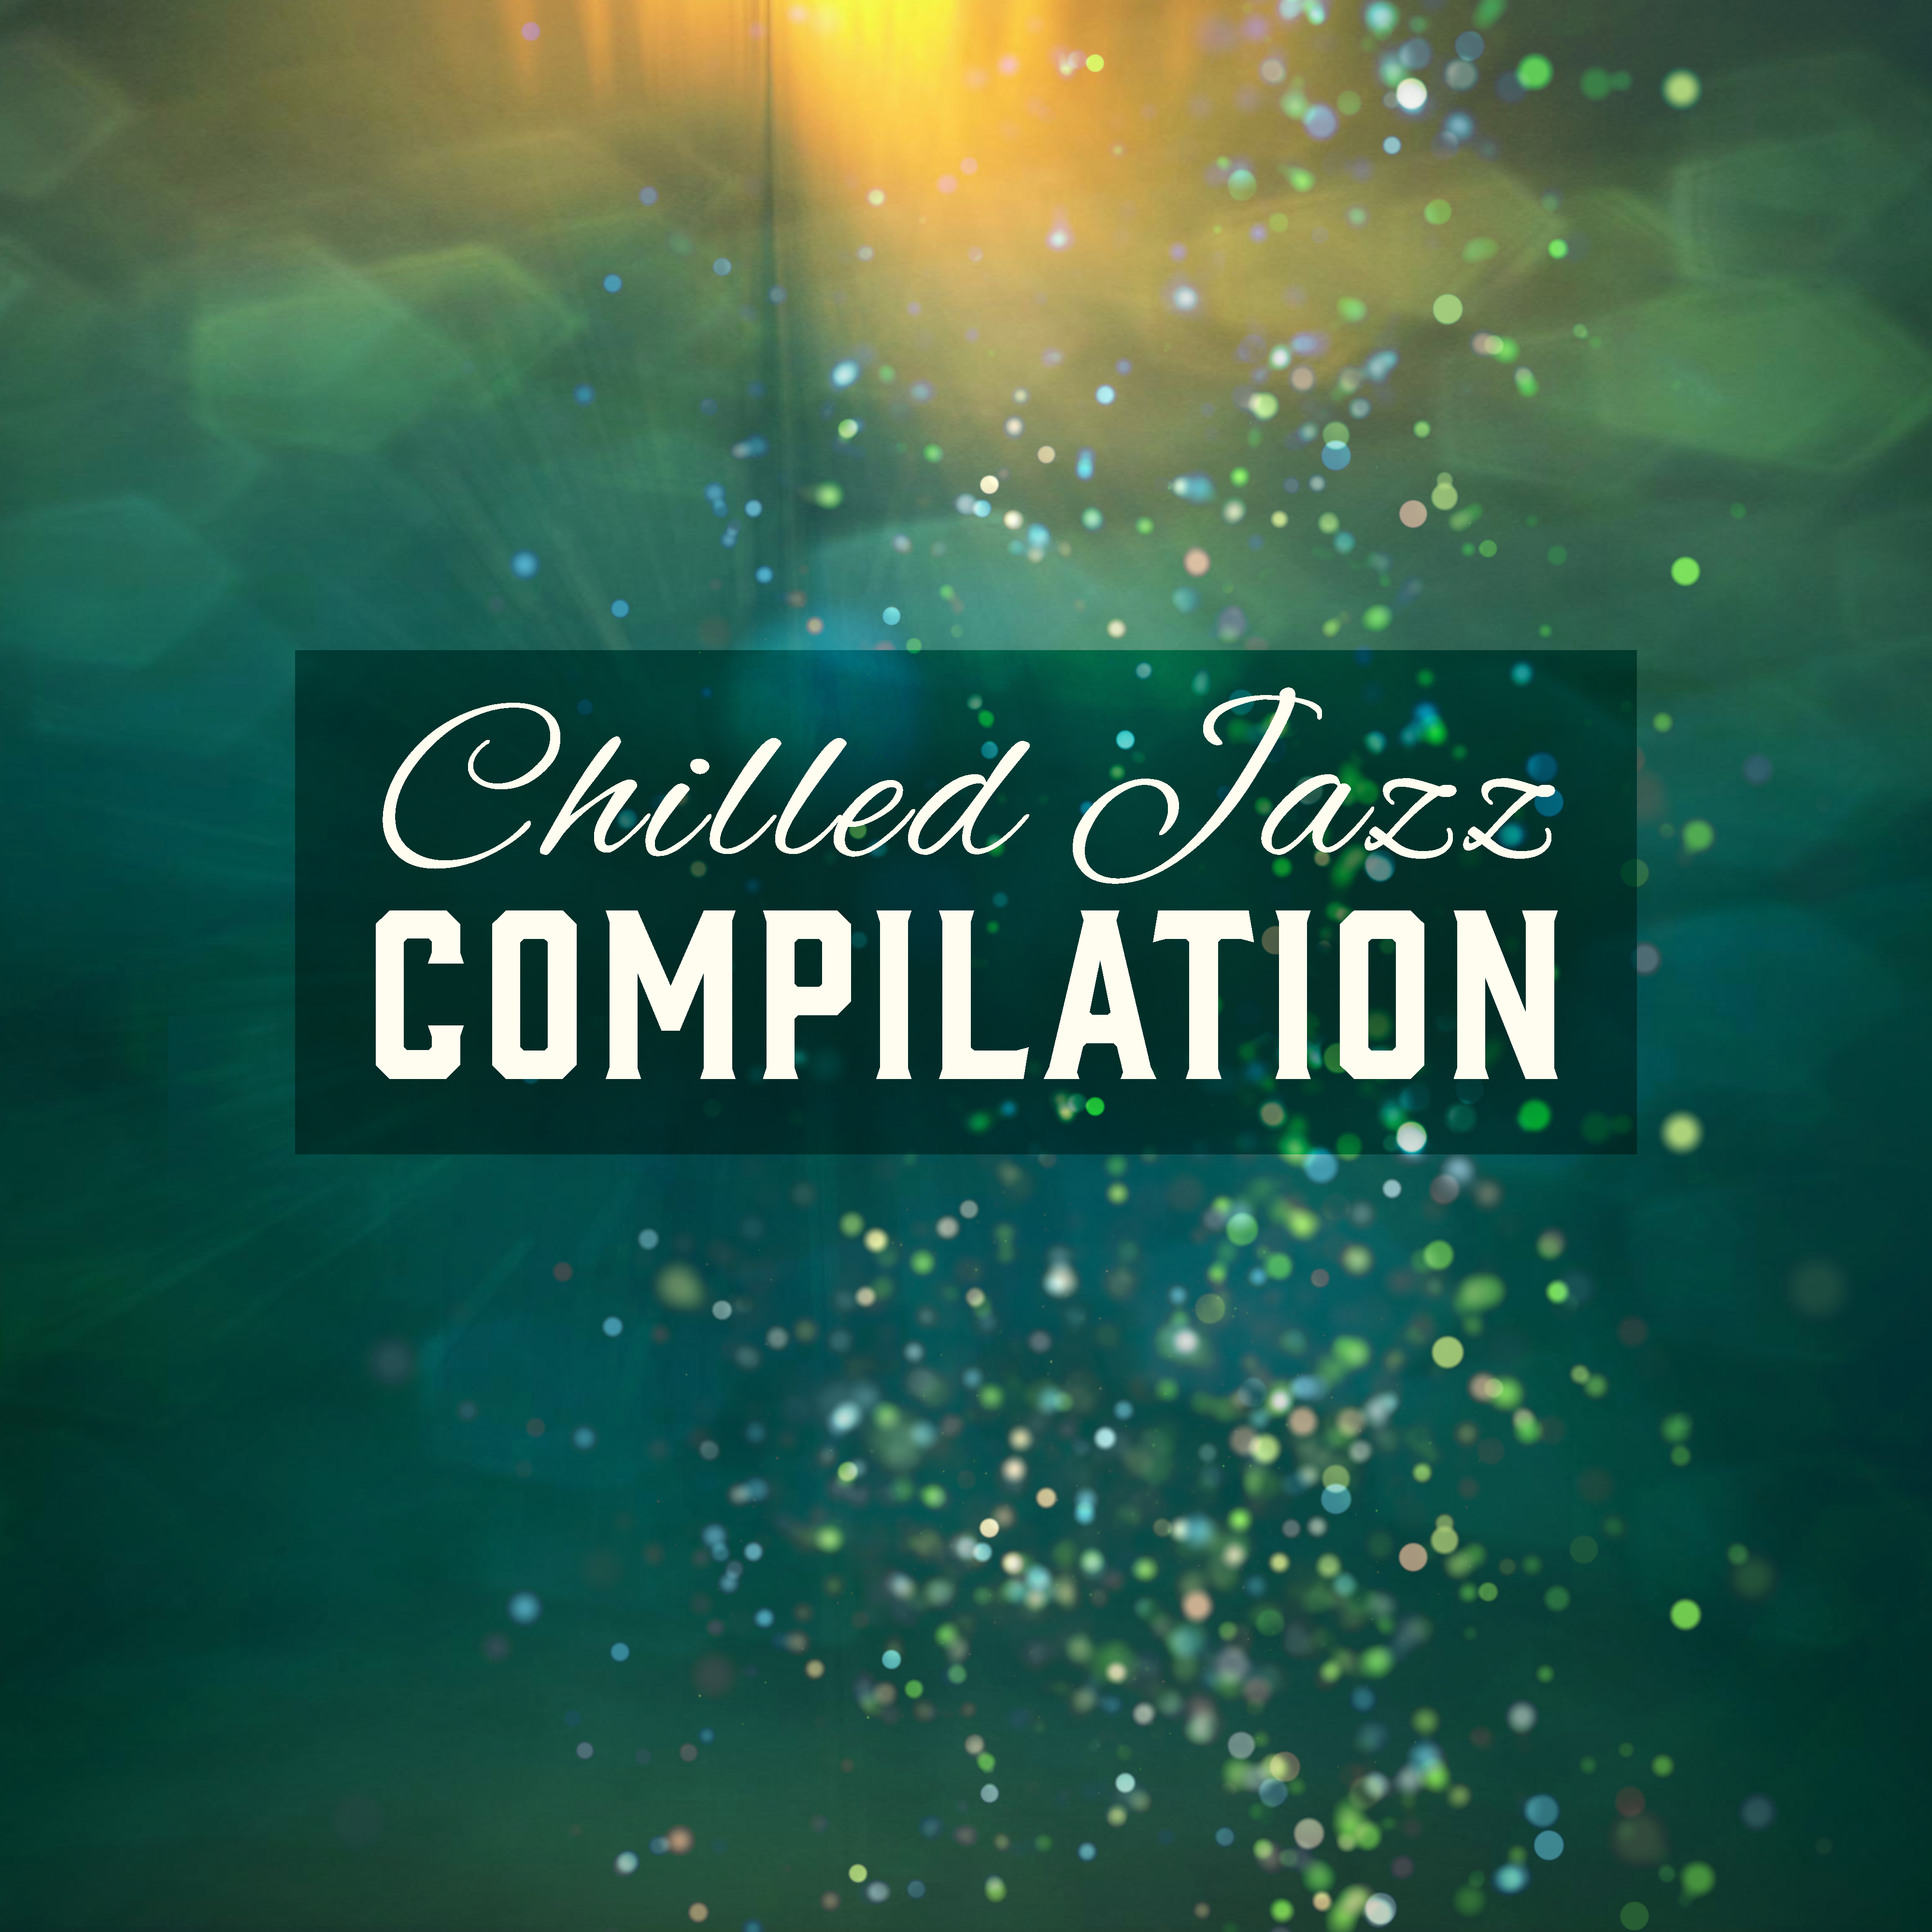 Chilled Jazz Compilation  Relaxing Jazz Melodies, Lounge, Jazz for Autumn  Melancholy, Ambient Vibes